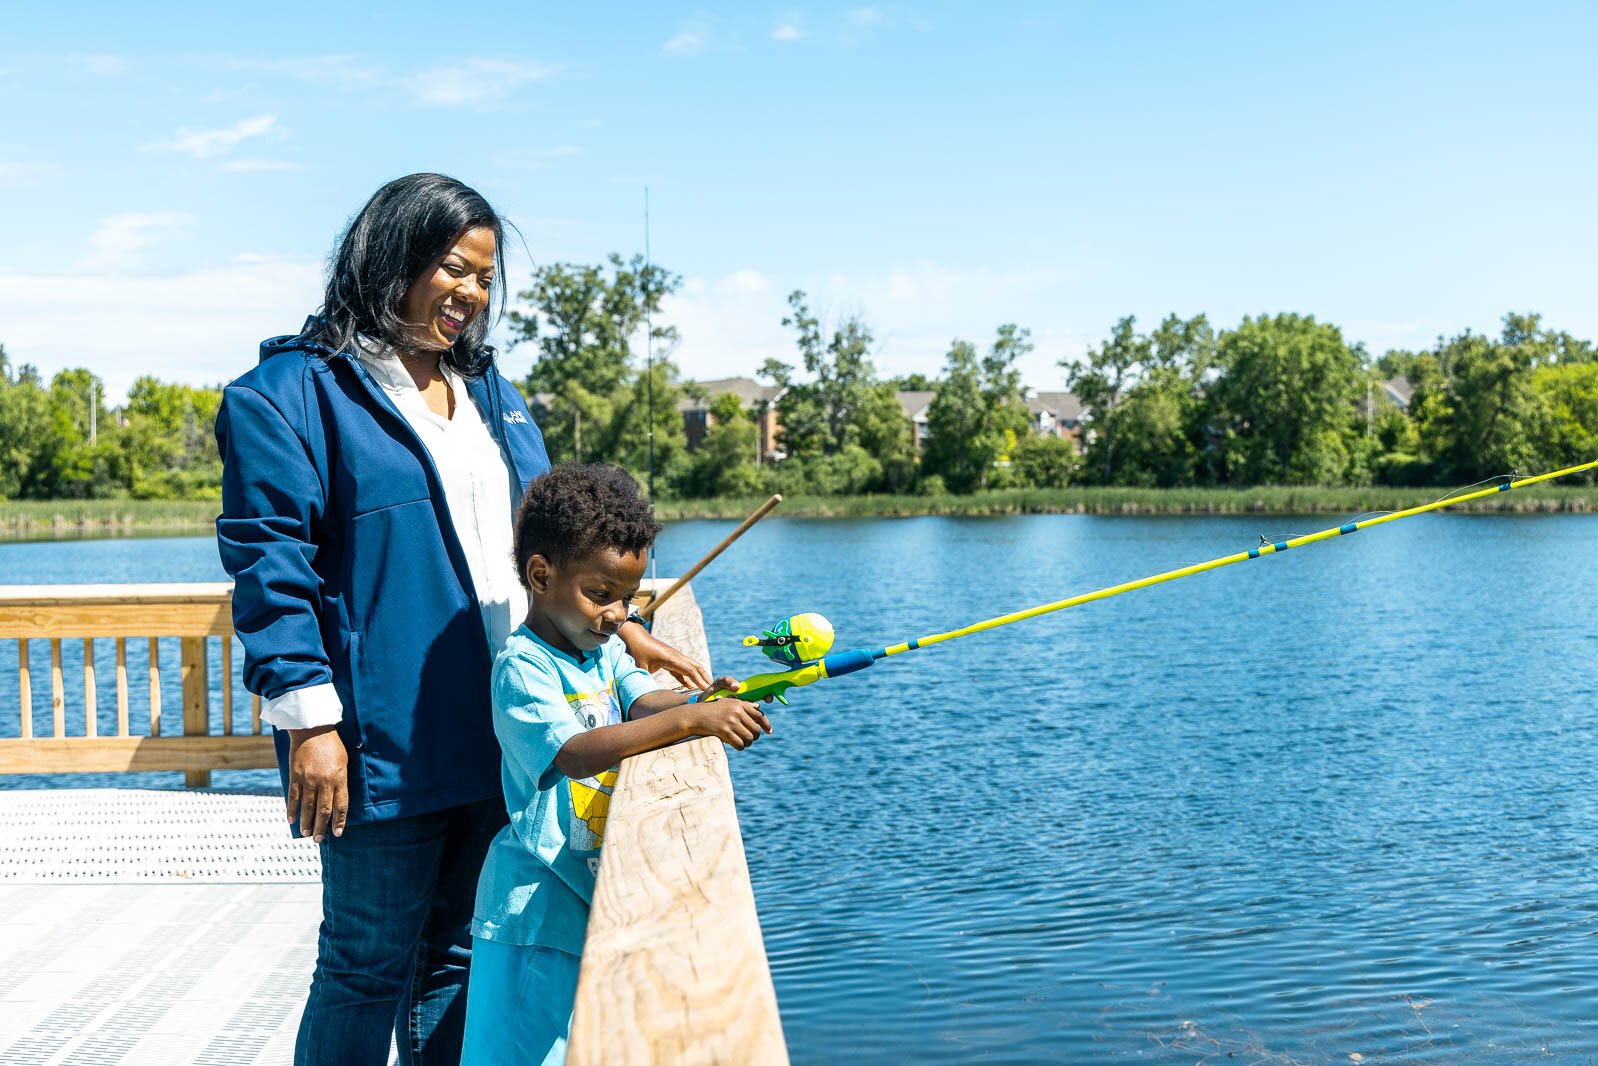 A new dock at Pontiac Oaks park, funded by Oakland County's Healthy Communities plan.